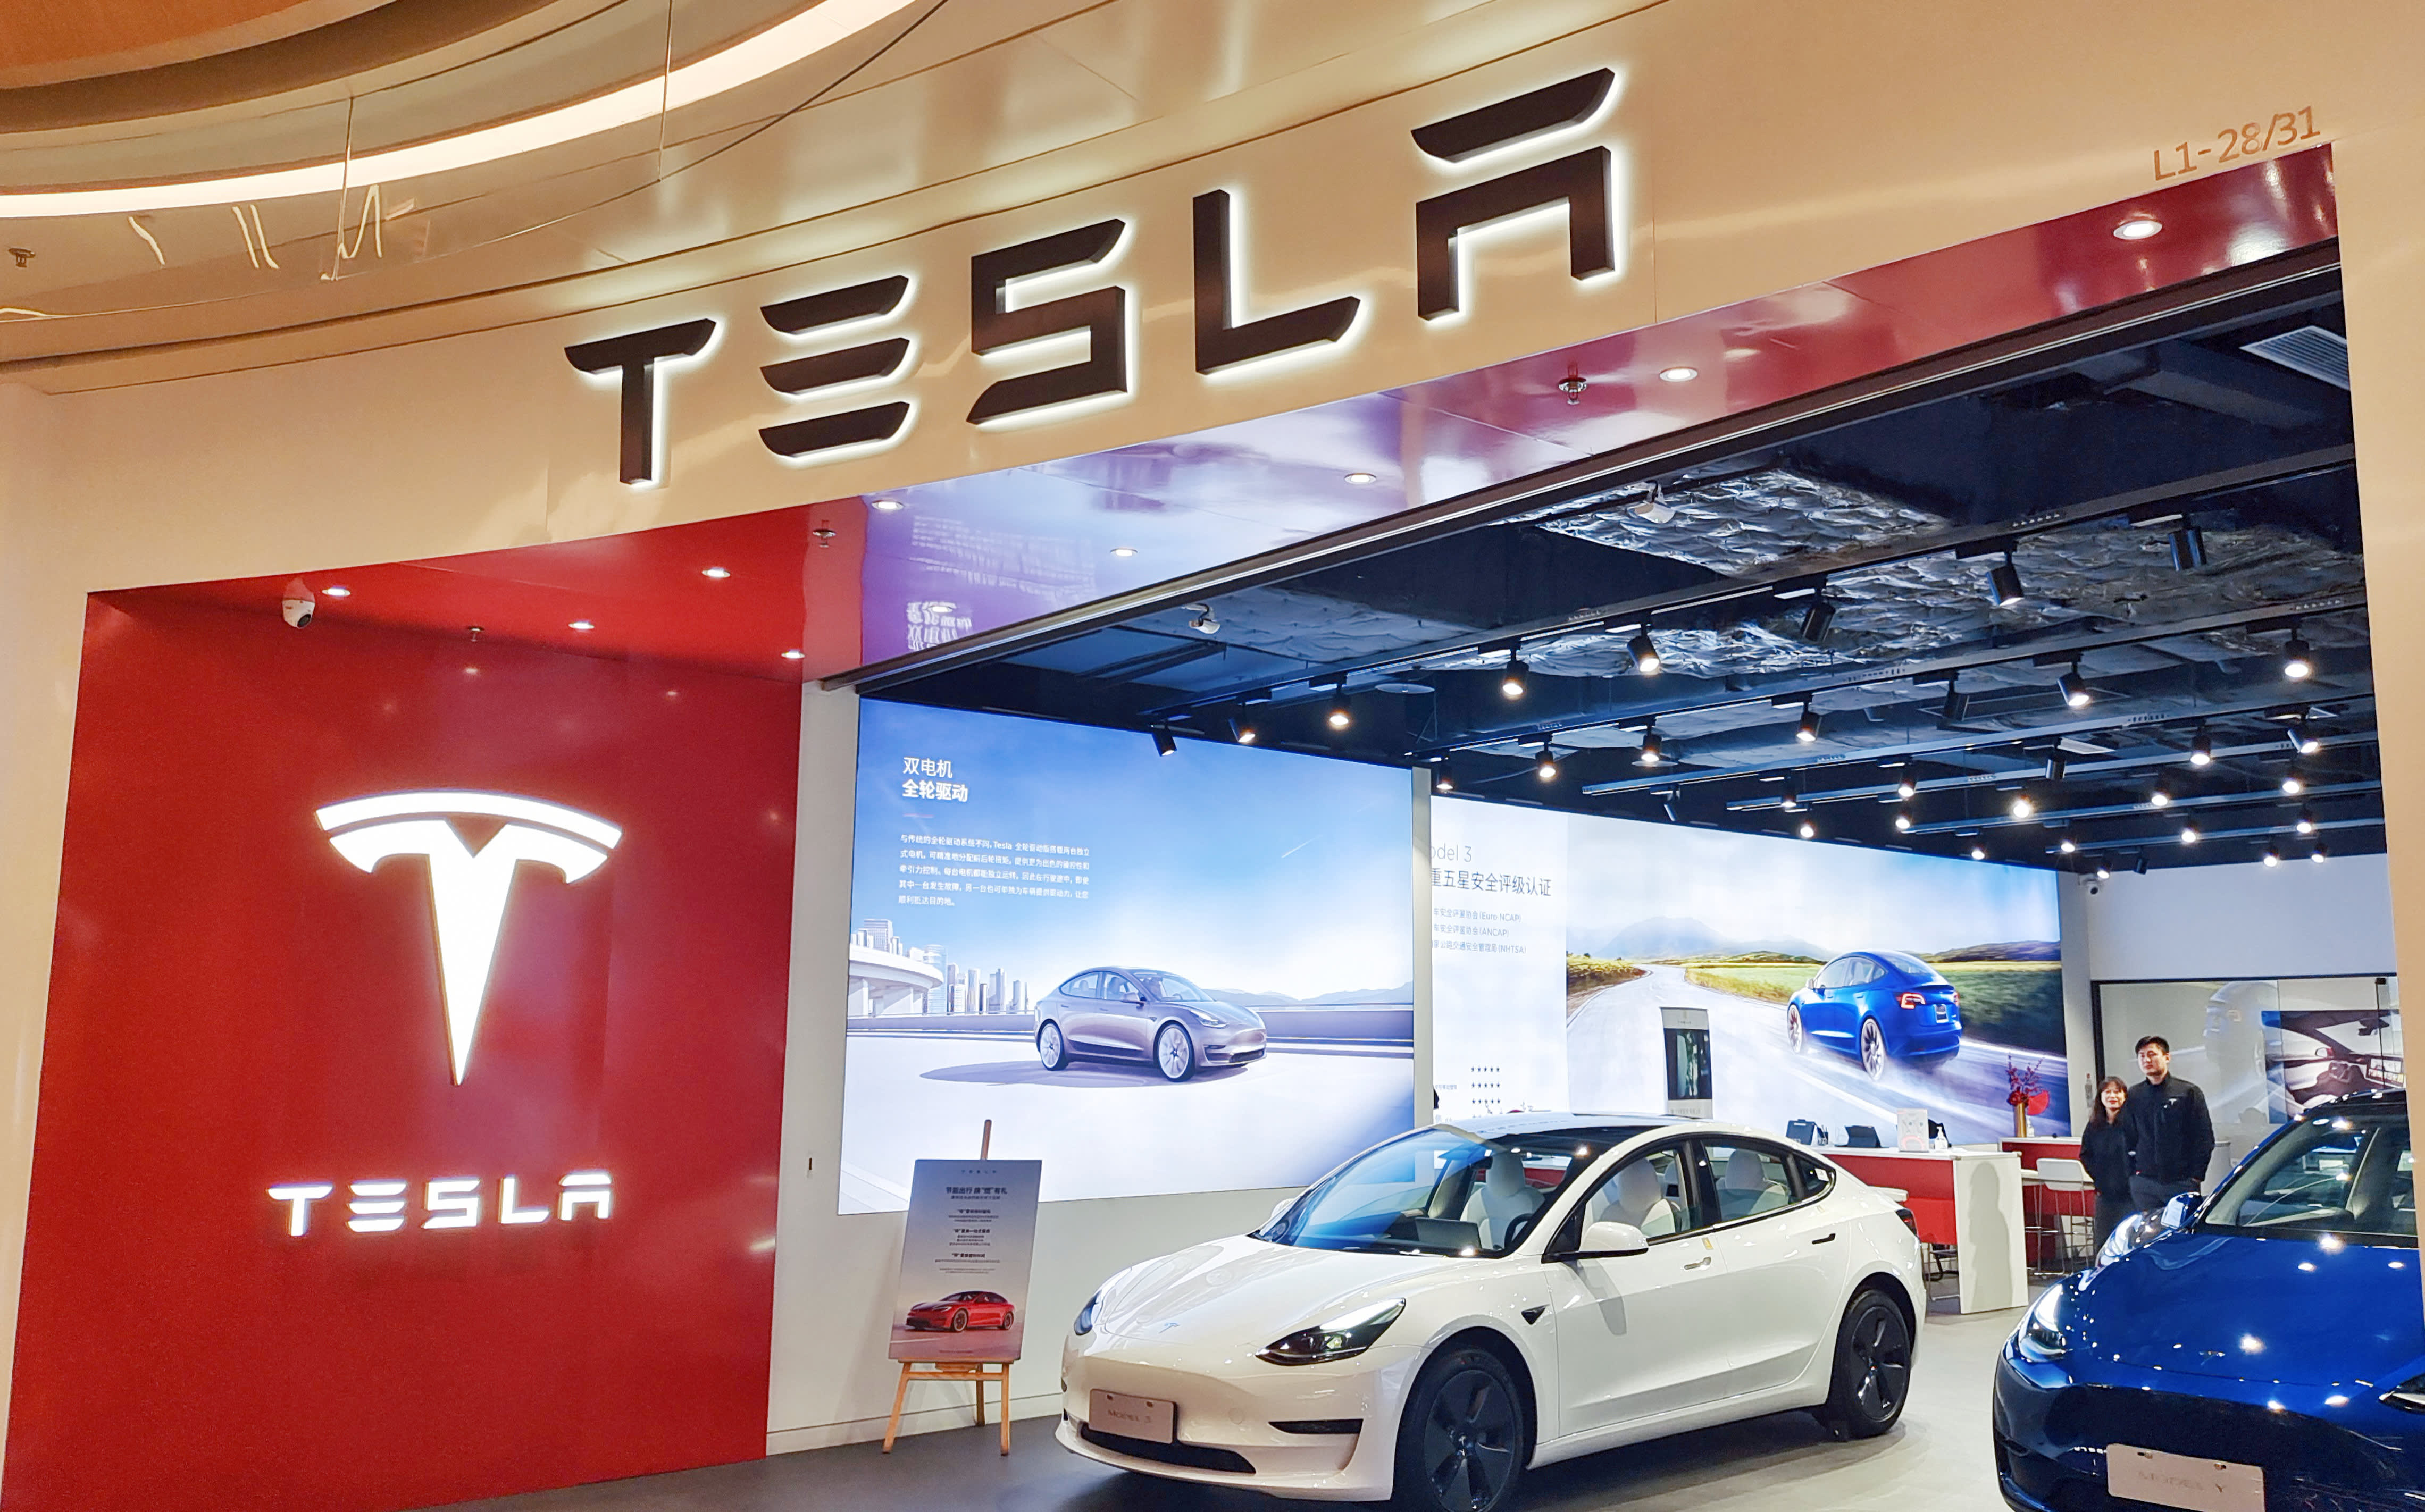 Tesla shares are down 35% this month - and short sellers have piled up